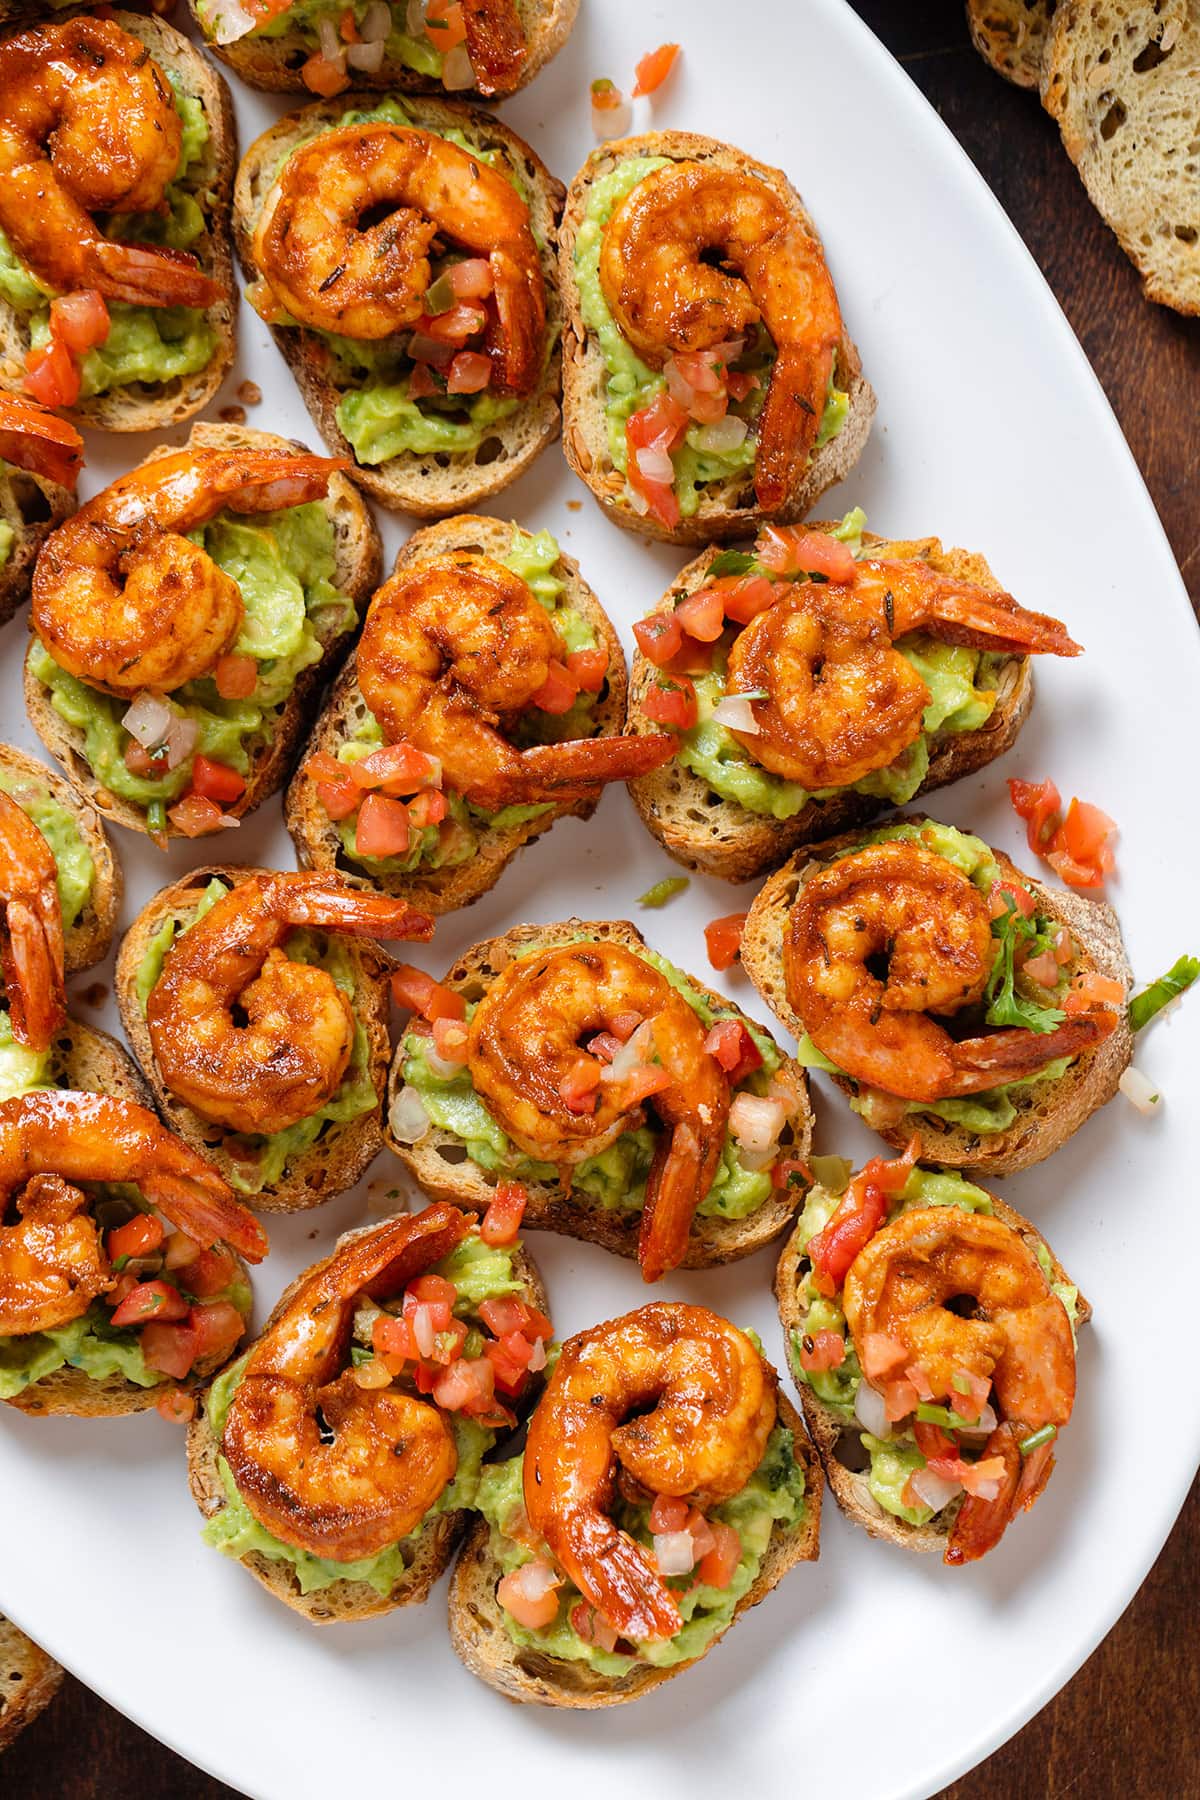 Toasted baguette slices topped with guacamole, fresh salsa, and cajun shrimp.